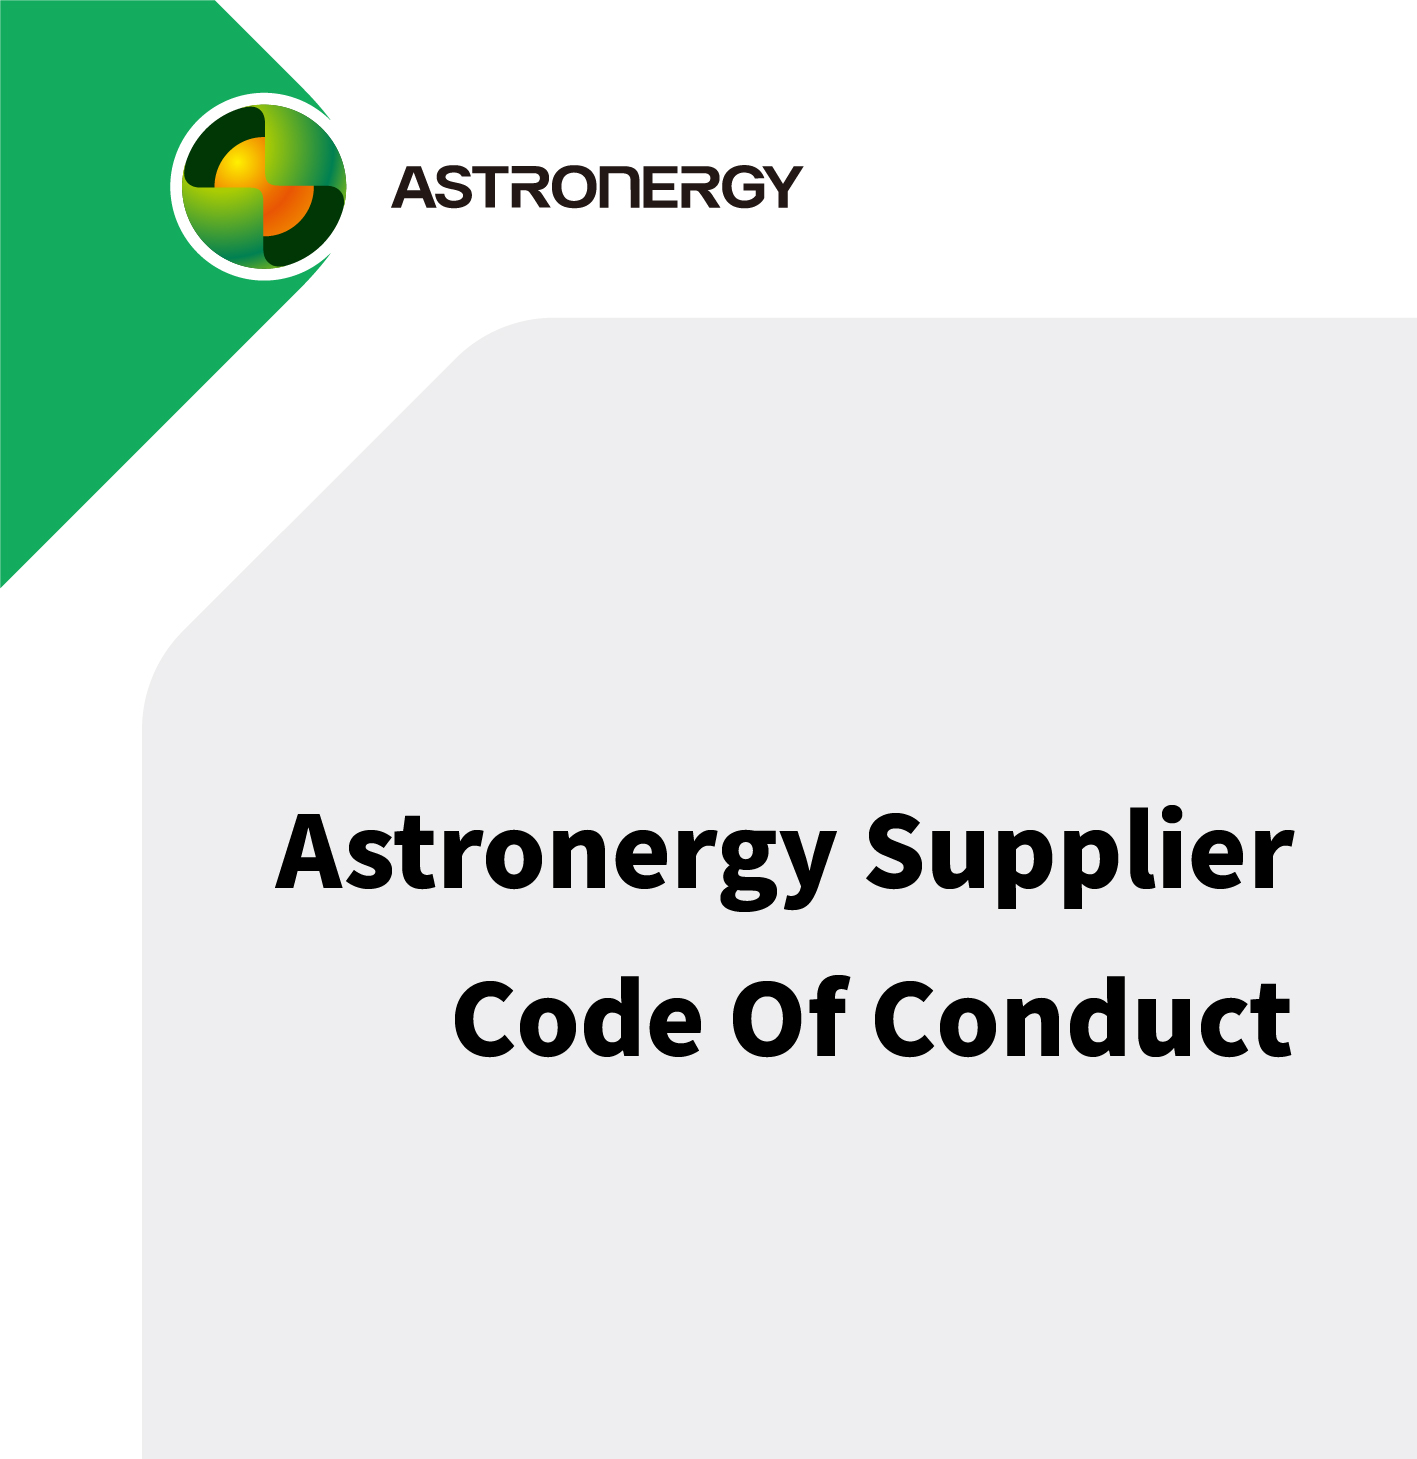 Astronergy Supplier Code Of Conduct